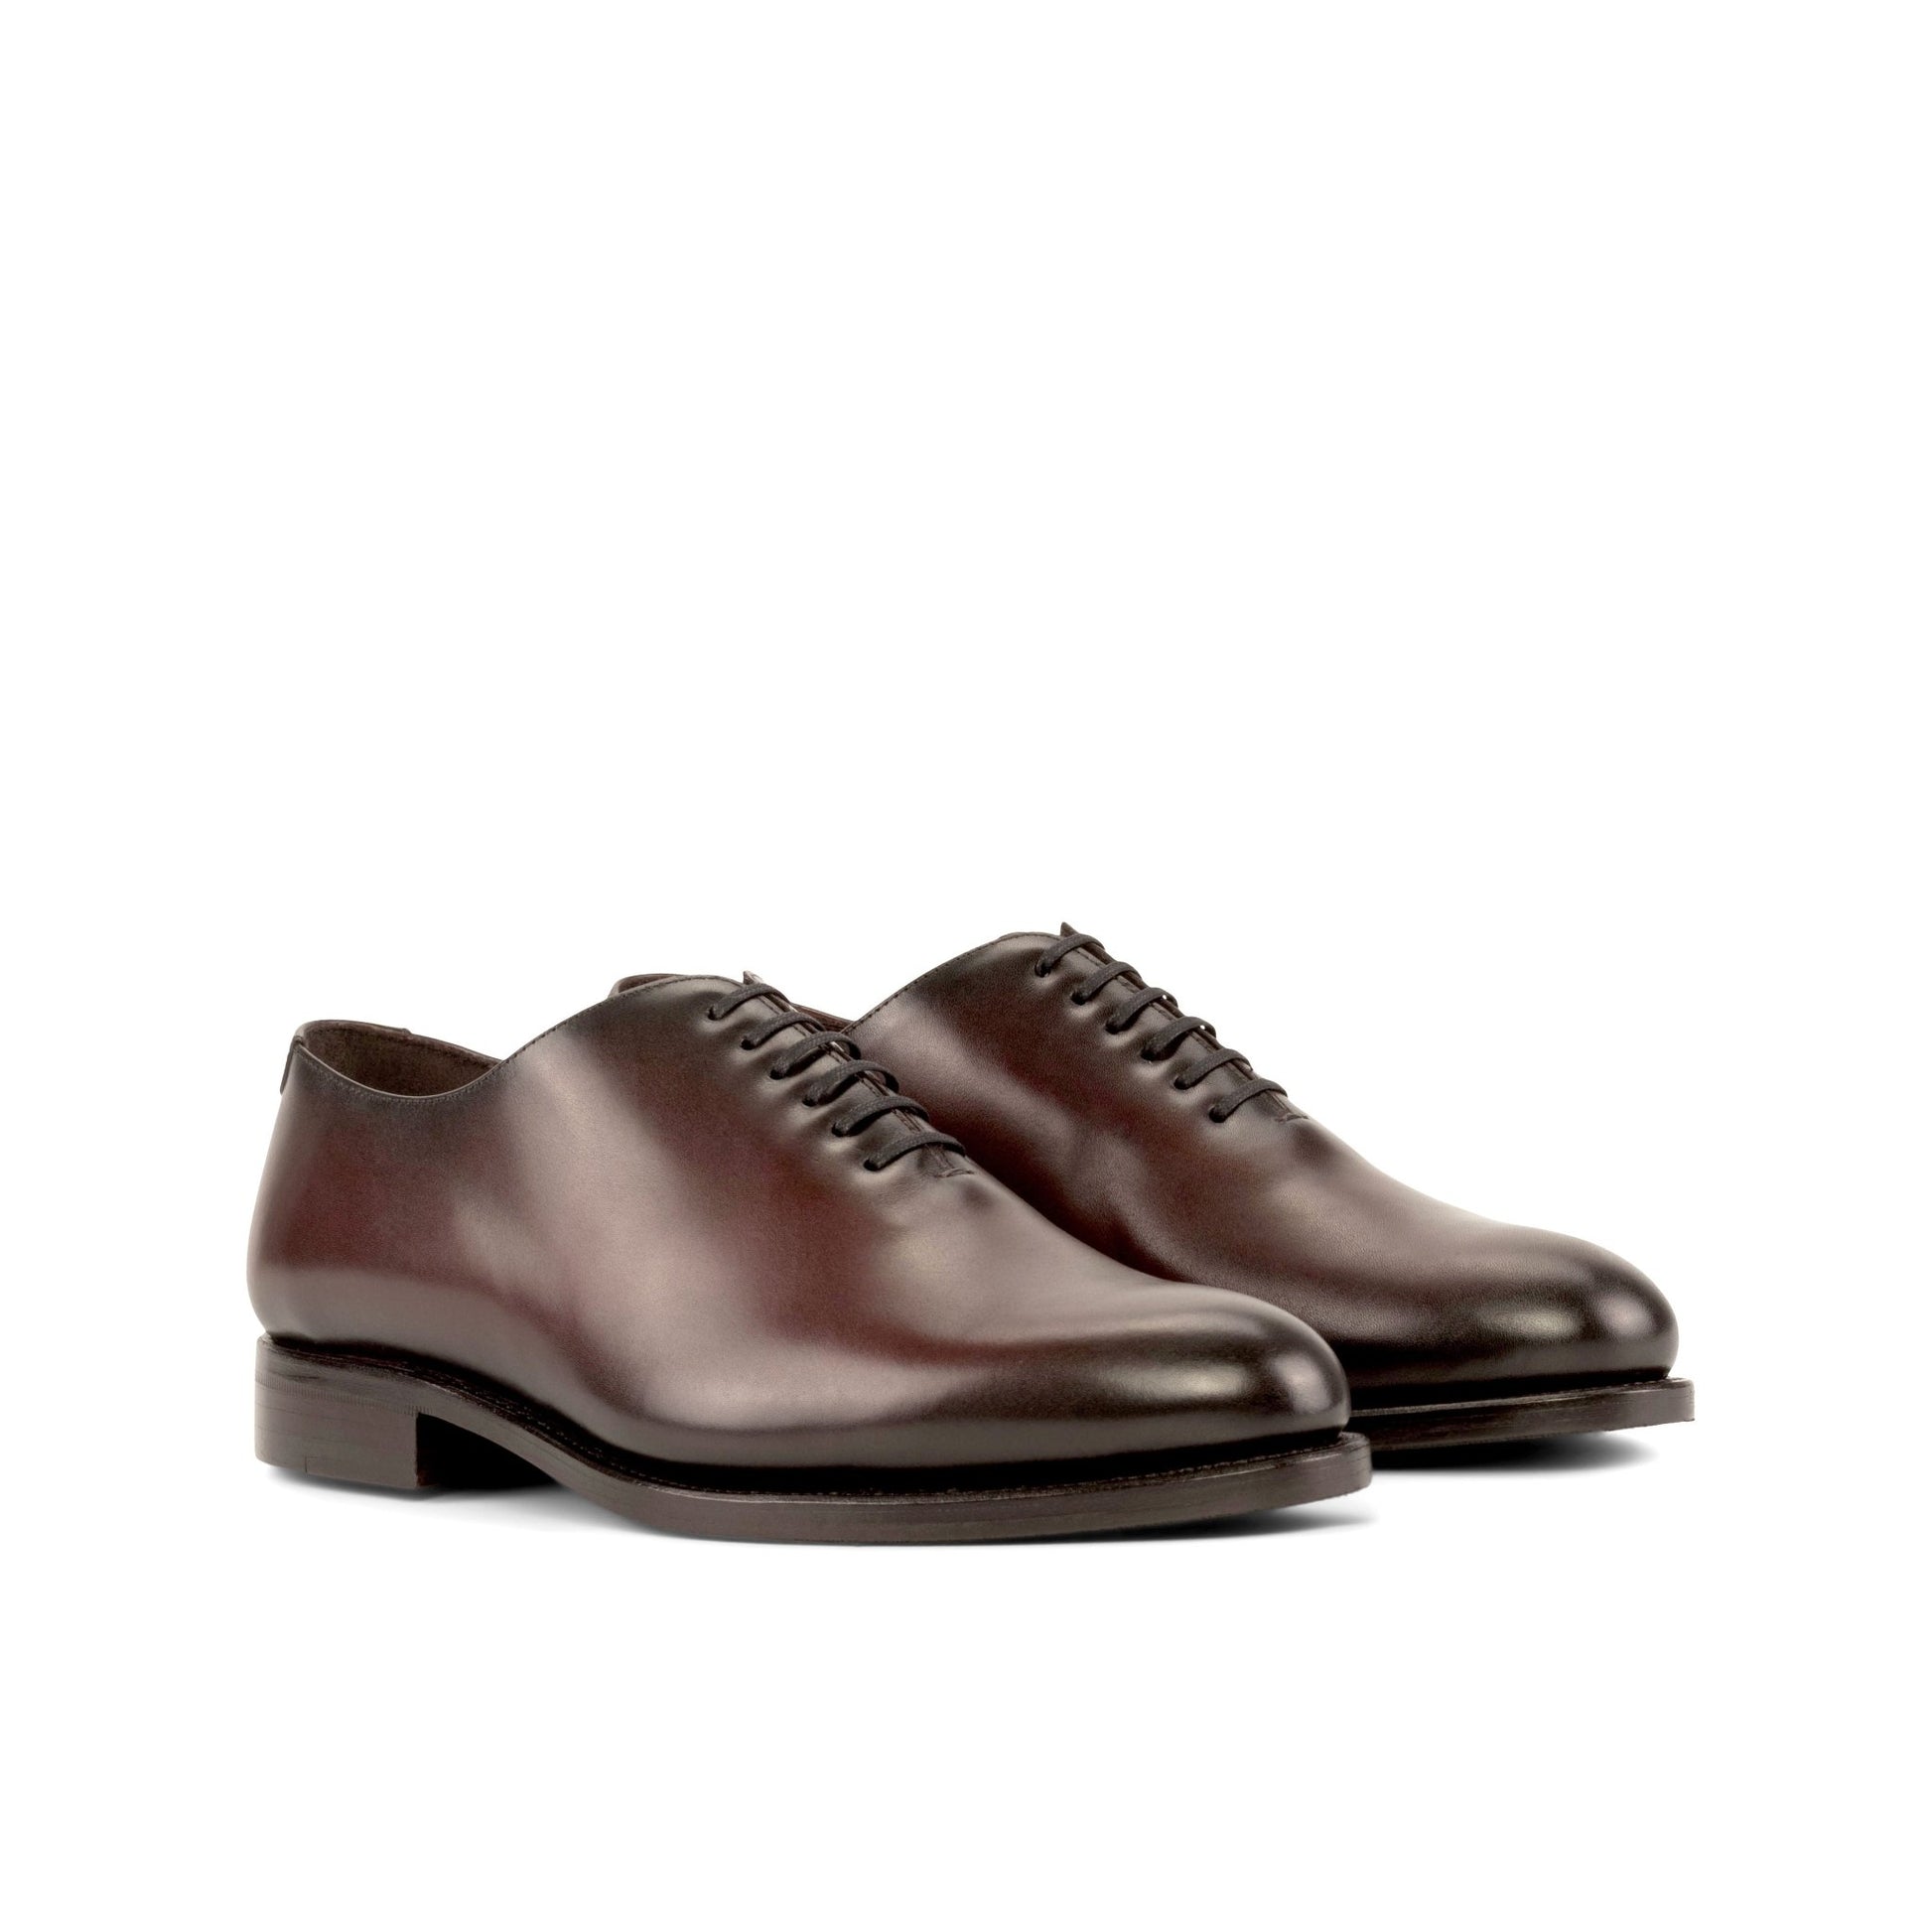 Wholecut Oxford in Burgundy Box Calf - Zatorres | Free Shipping on orders over $200